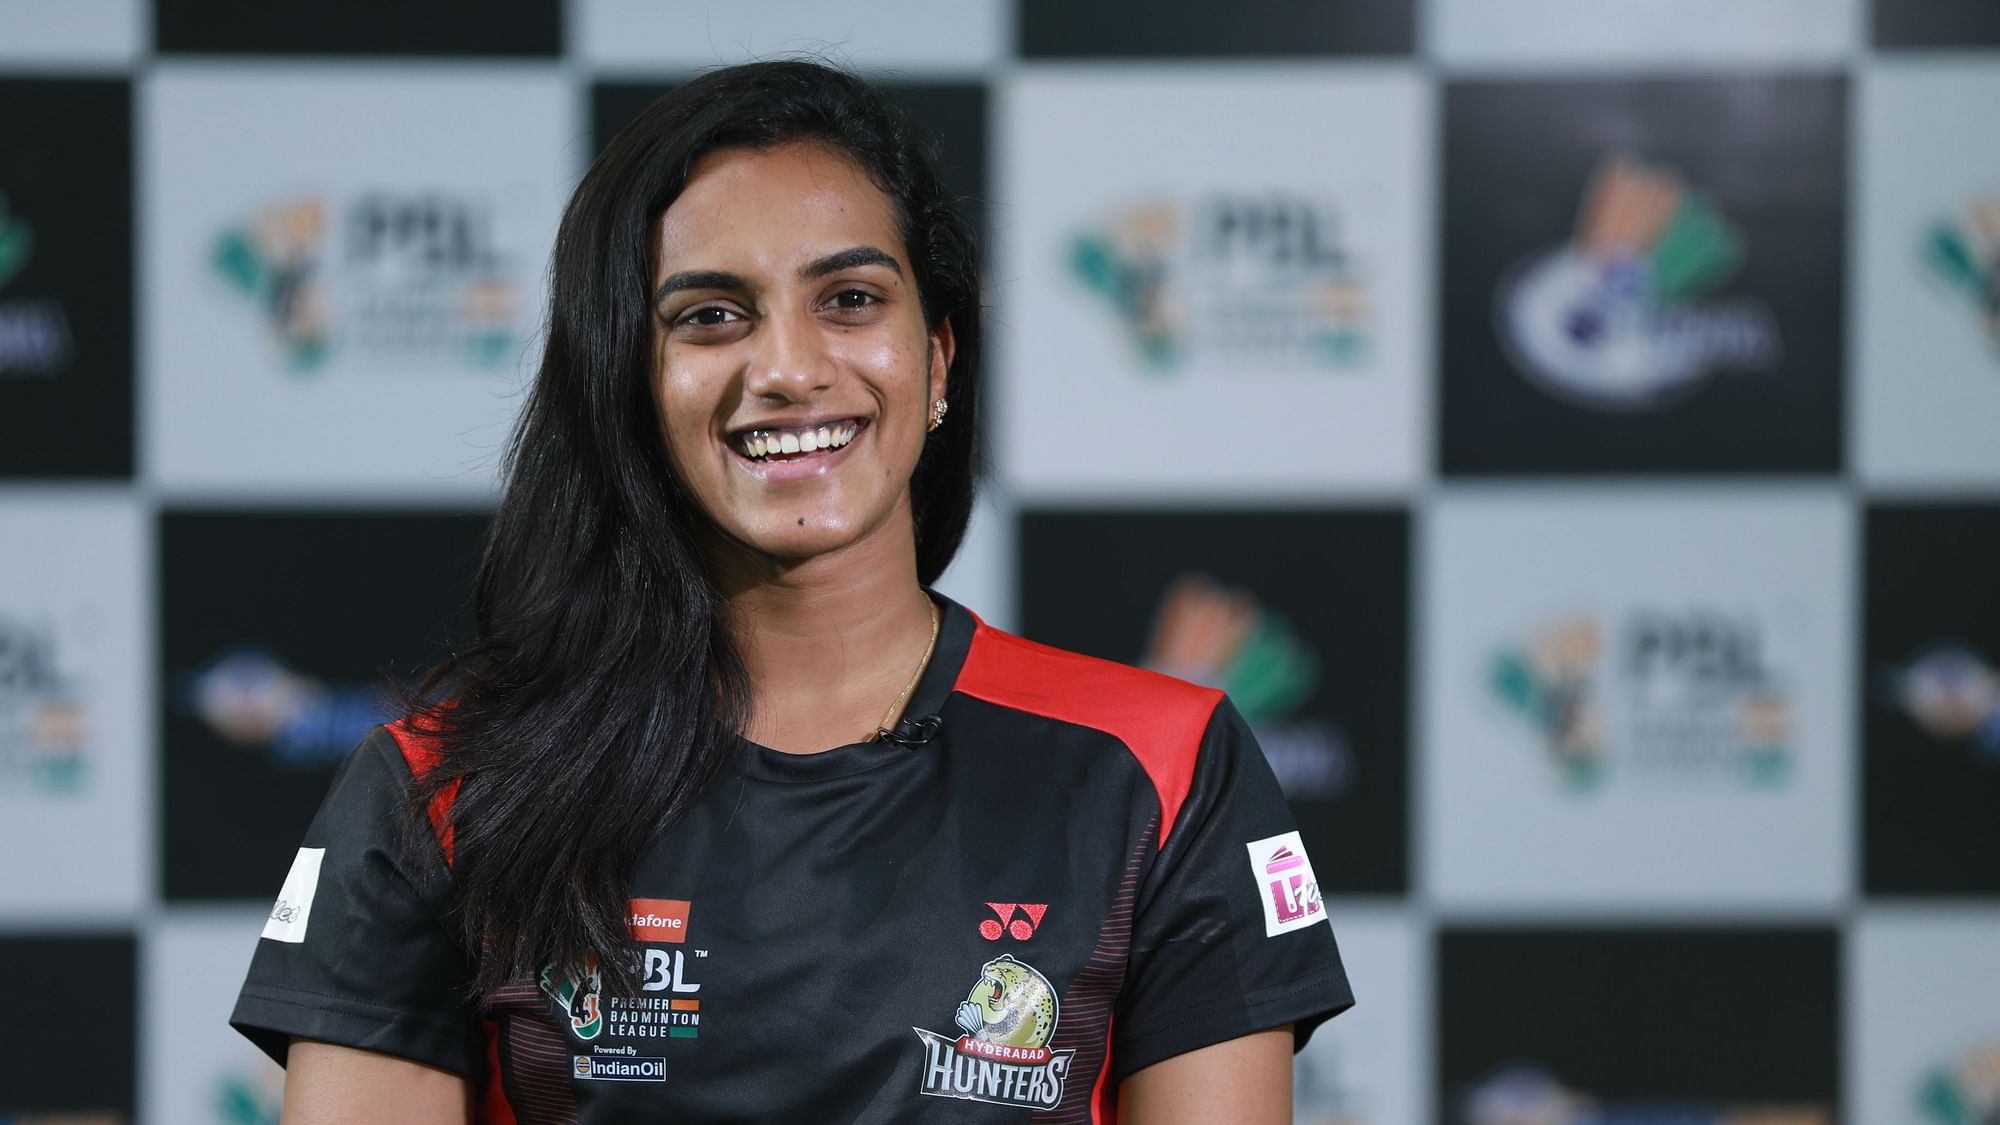 PV Sindhu won the World Championships in 2019 but apart from that, she had a tough season without any big wins.